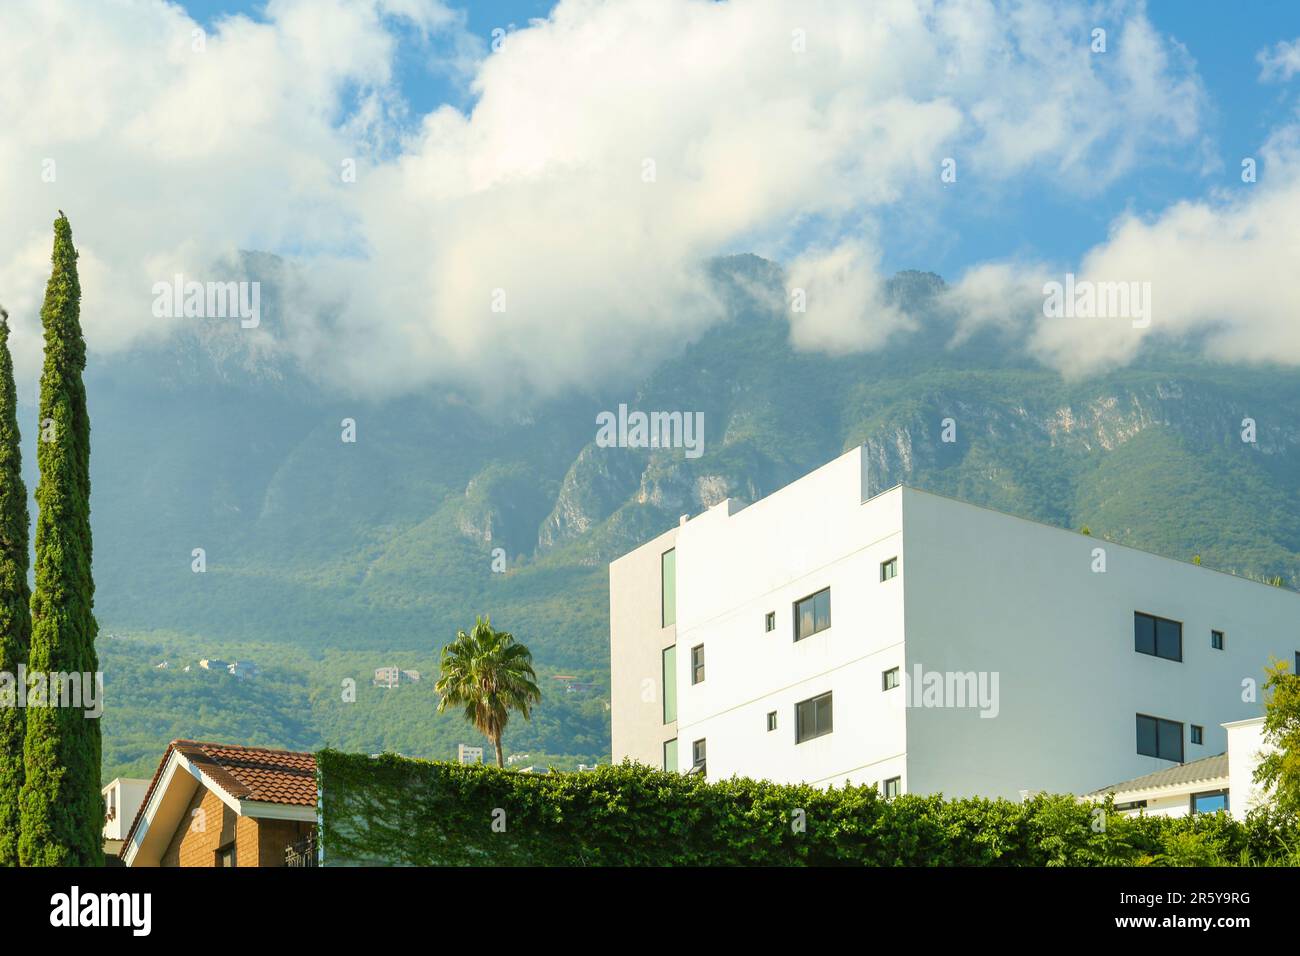 Beautiful view of building near mountains under cloudy sky Stock Photo